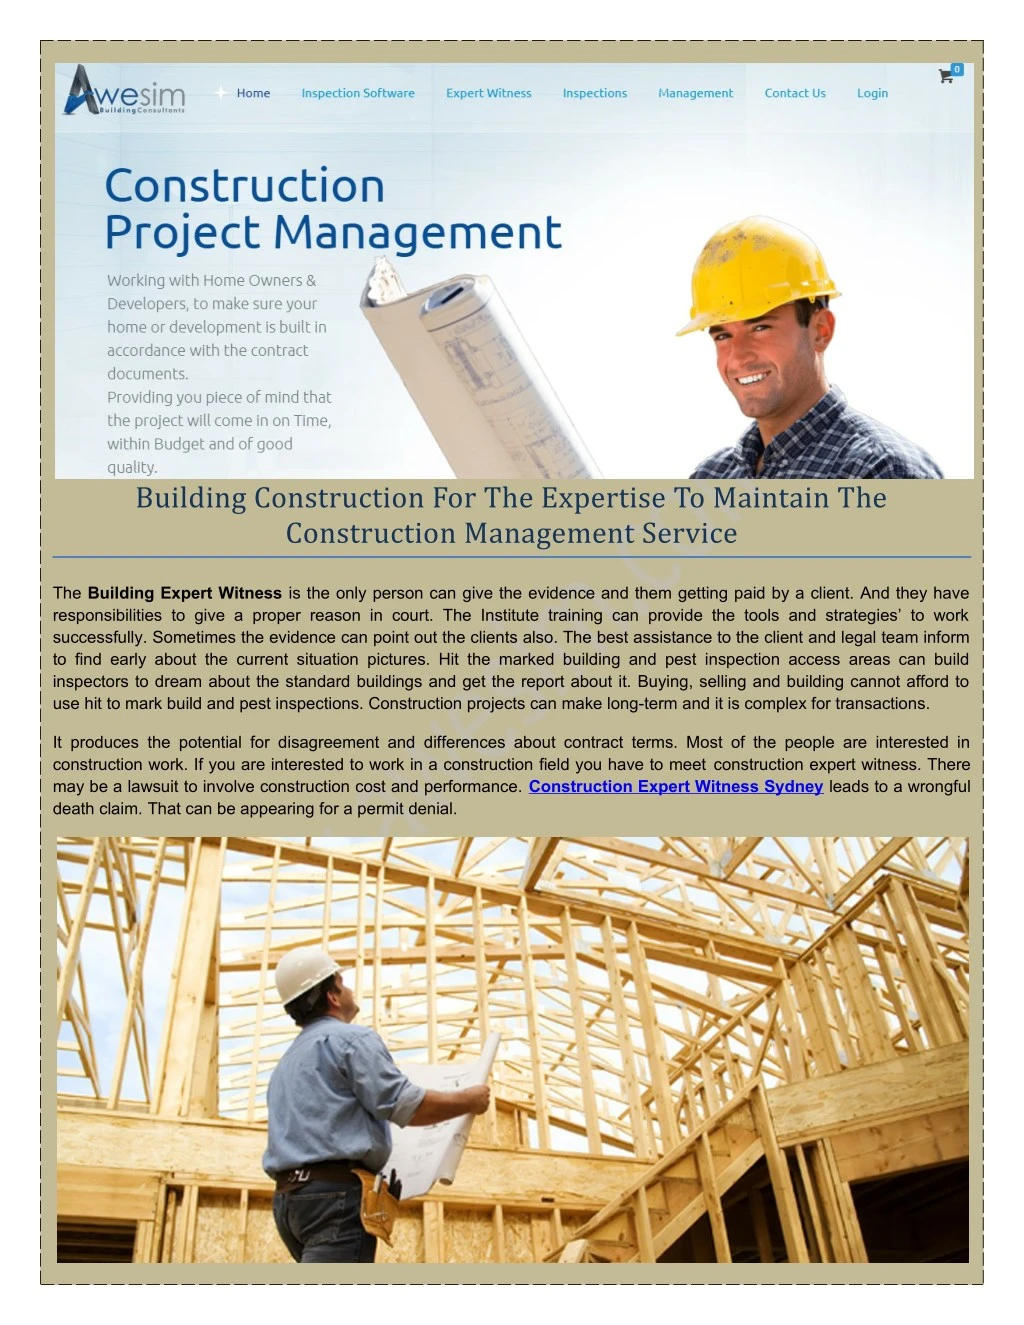 building construction for the expertise